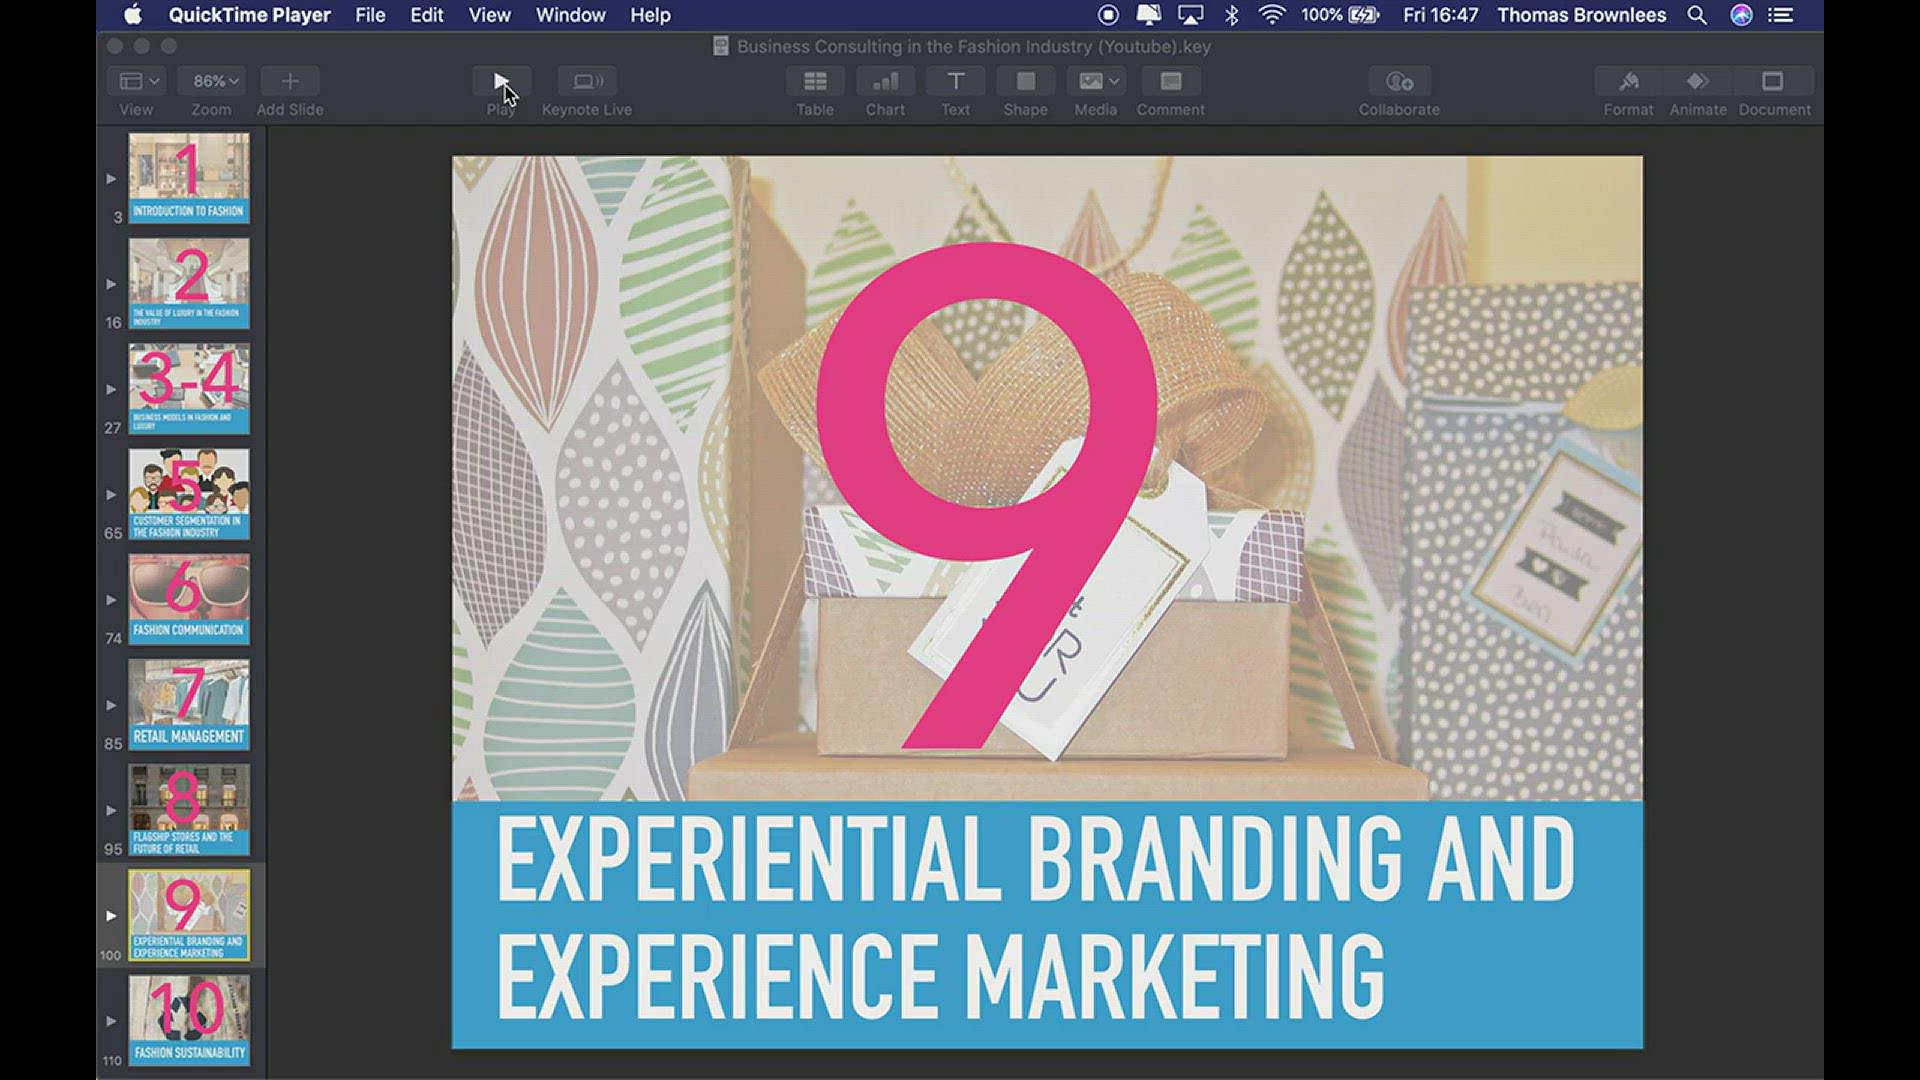 'Video thumbnail for Experiential Marketing in the Fashion Industry'